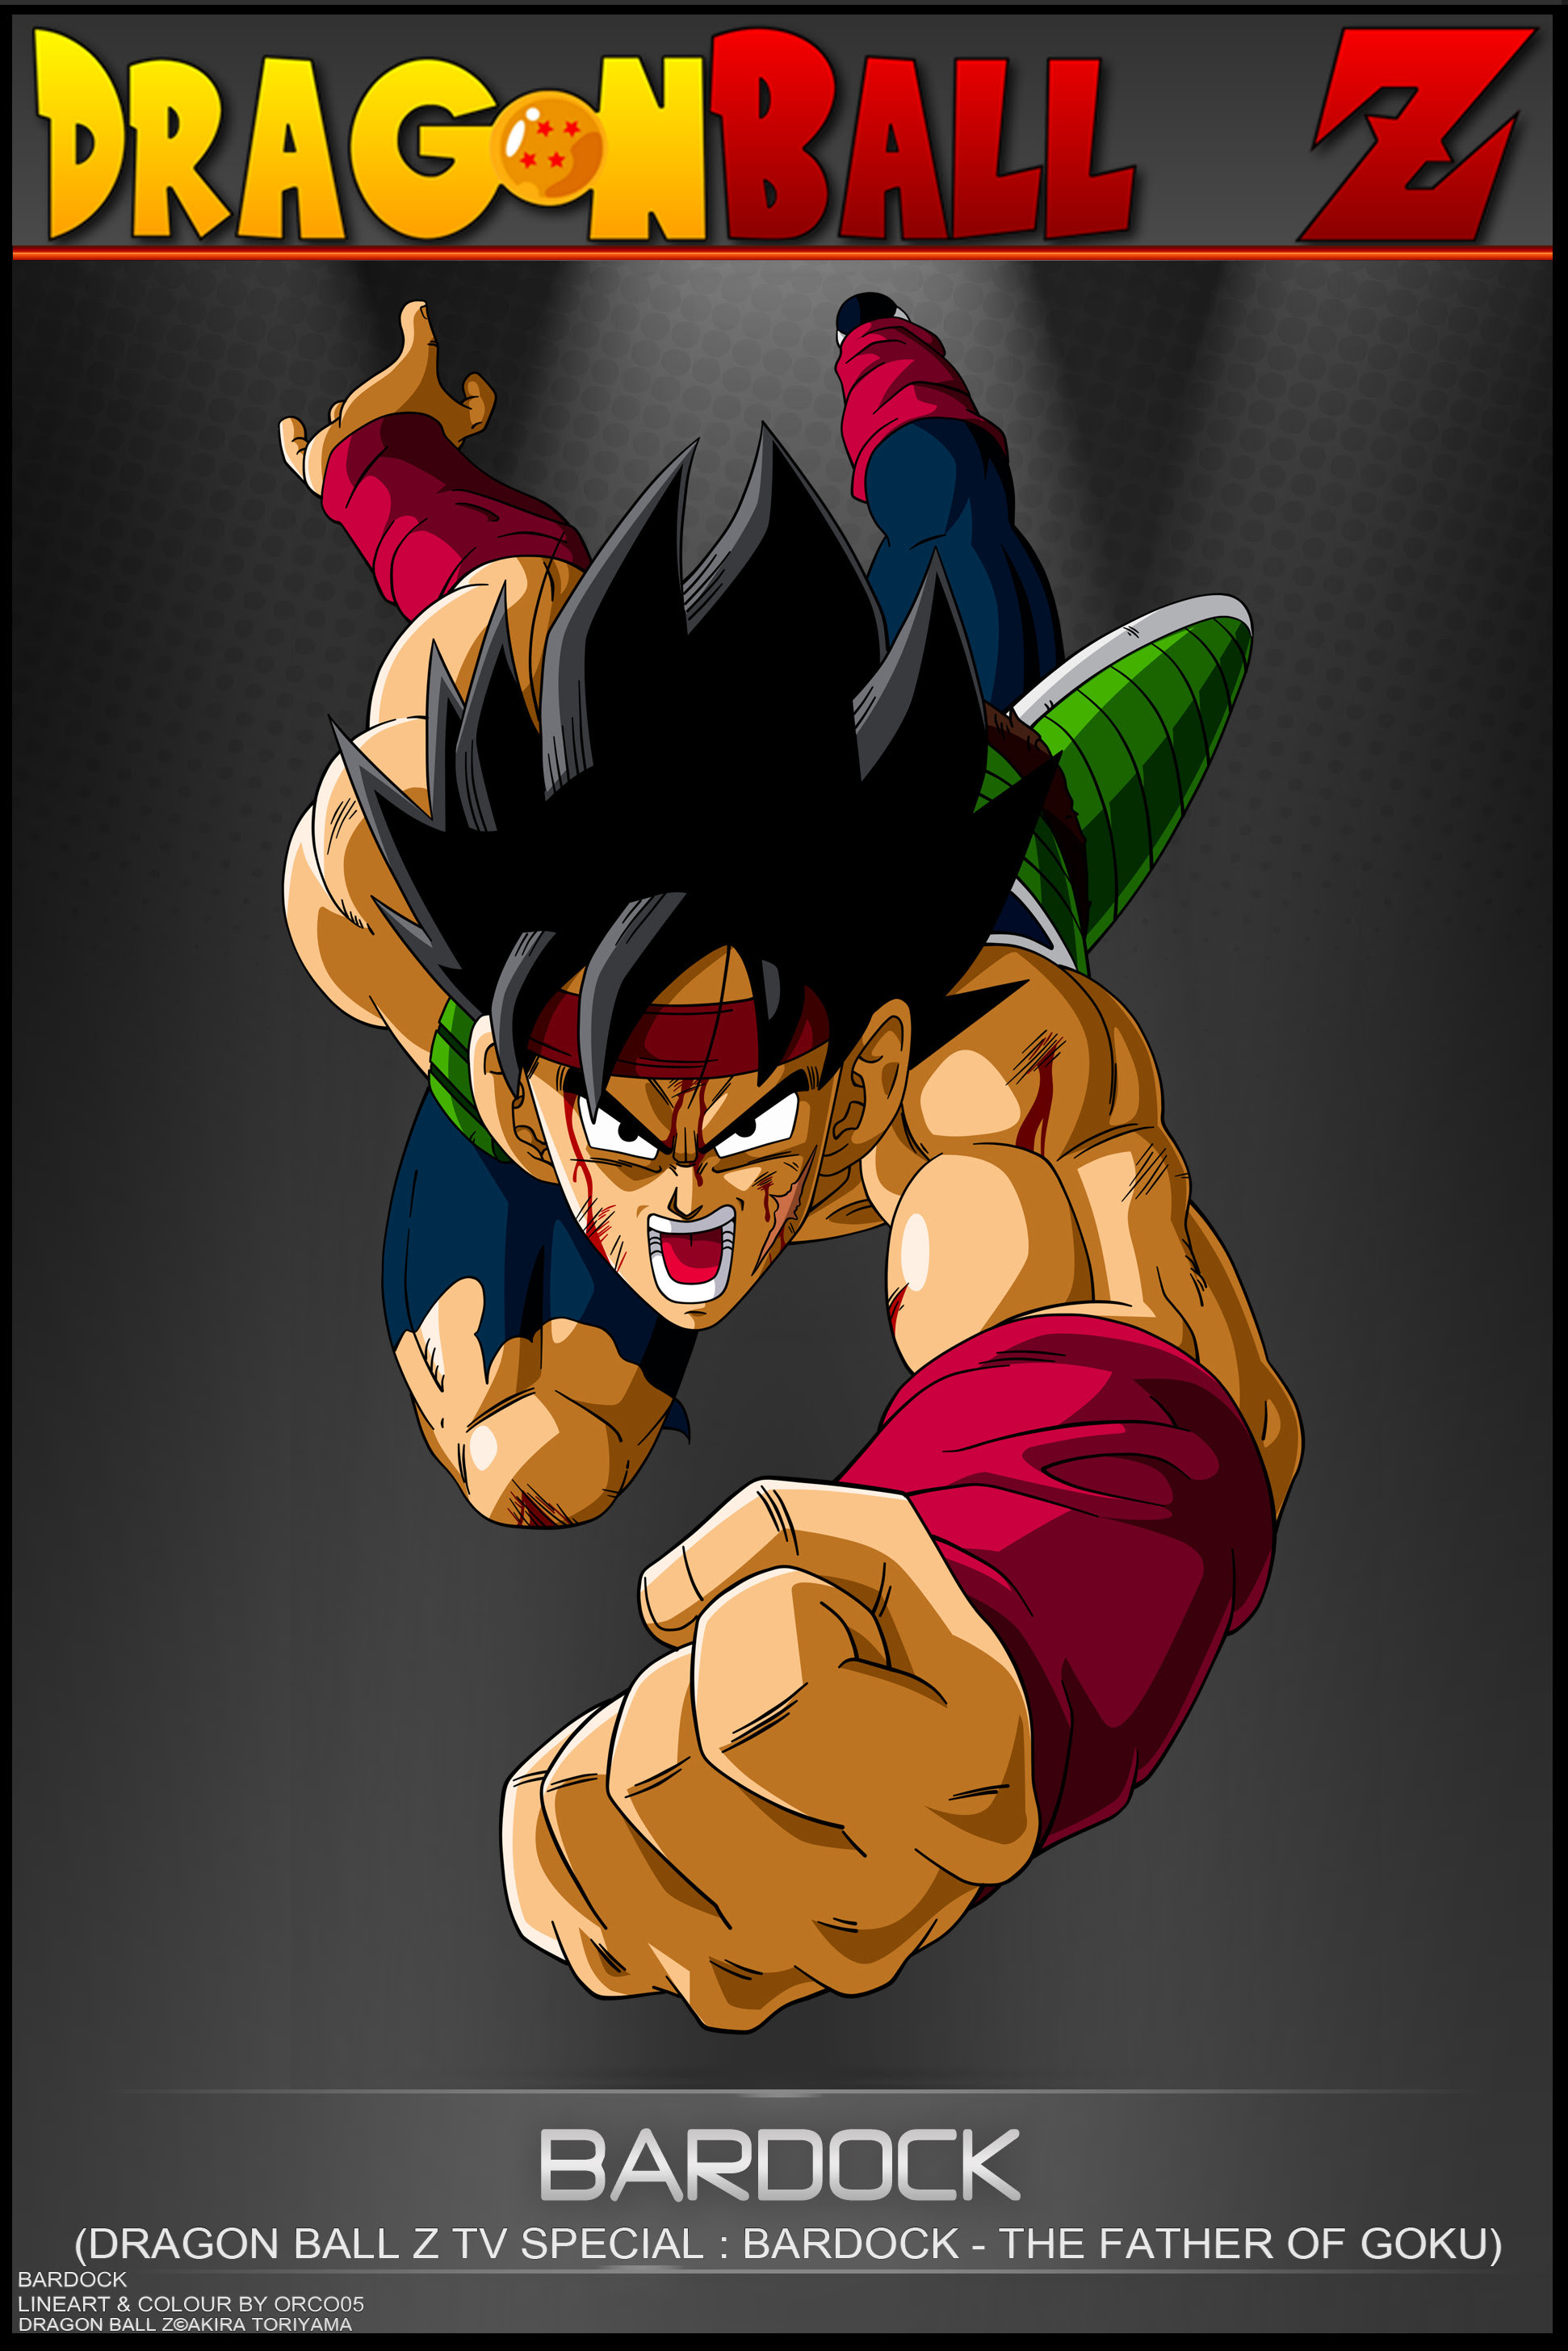 Dragon Ball Z Bardock The Father Of Goku Full Movie Free Download